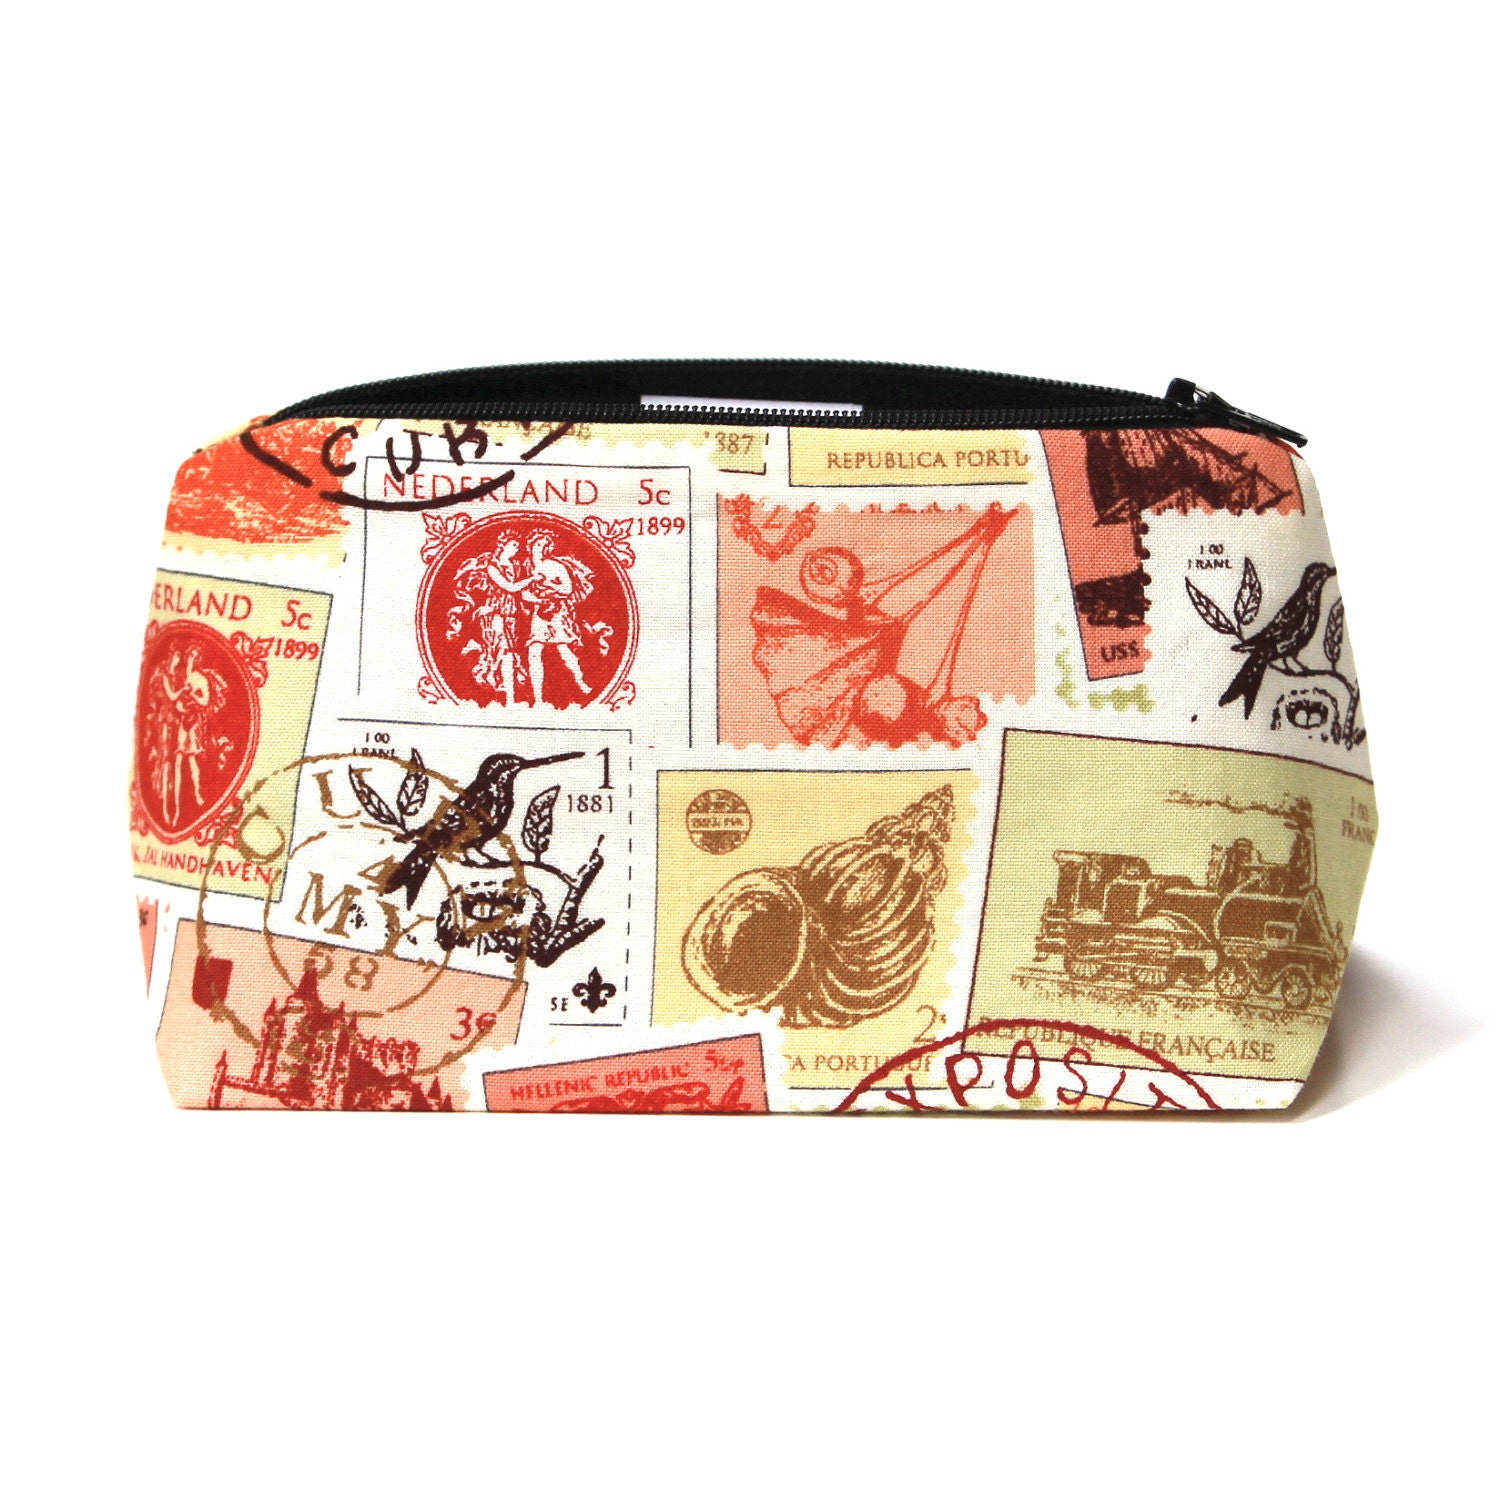 Vintage Stamps Travel Bag - Makeup Bag, Cosmetic Bag, Zipper Travel Pouch - Party Favor, Birthday Gift, Holiday Stocking Stuffer for her